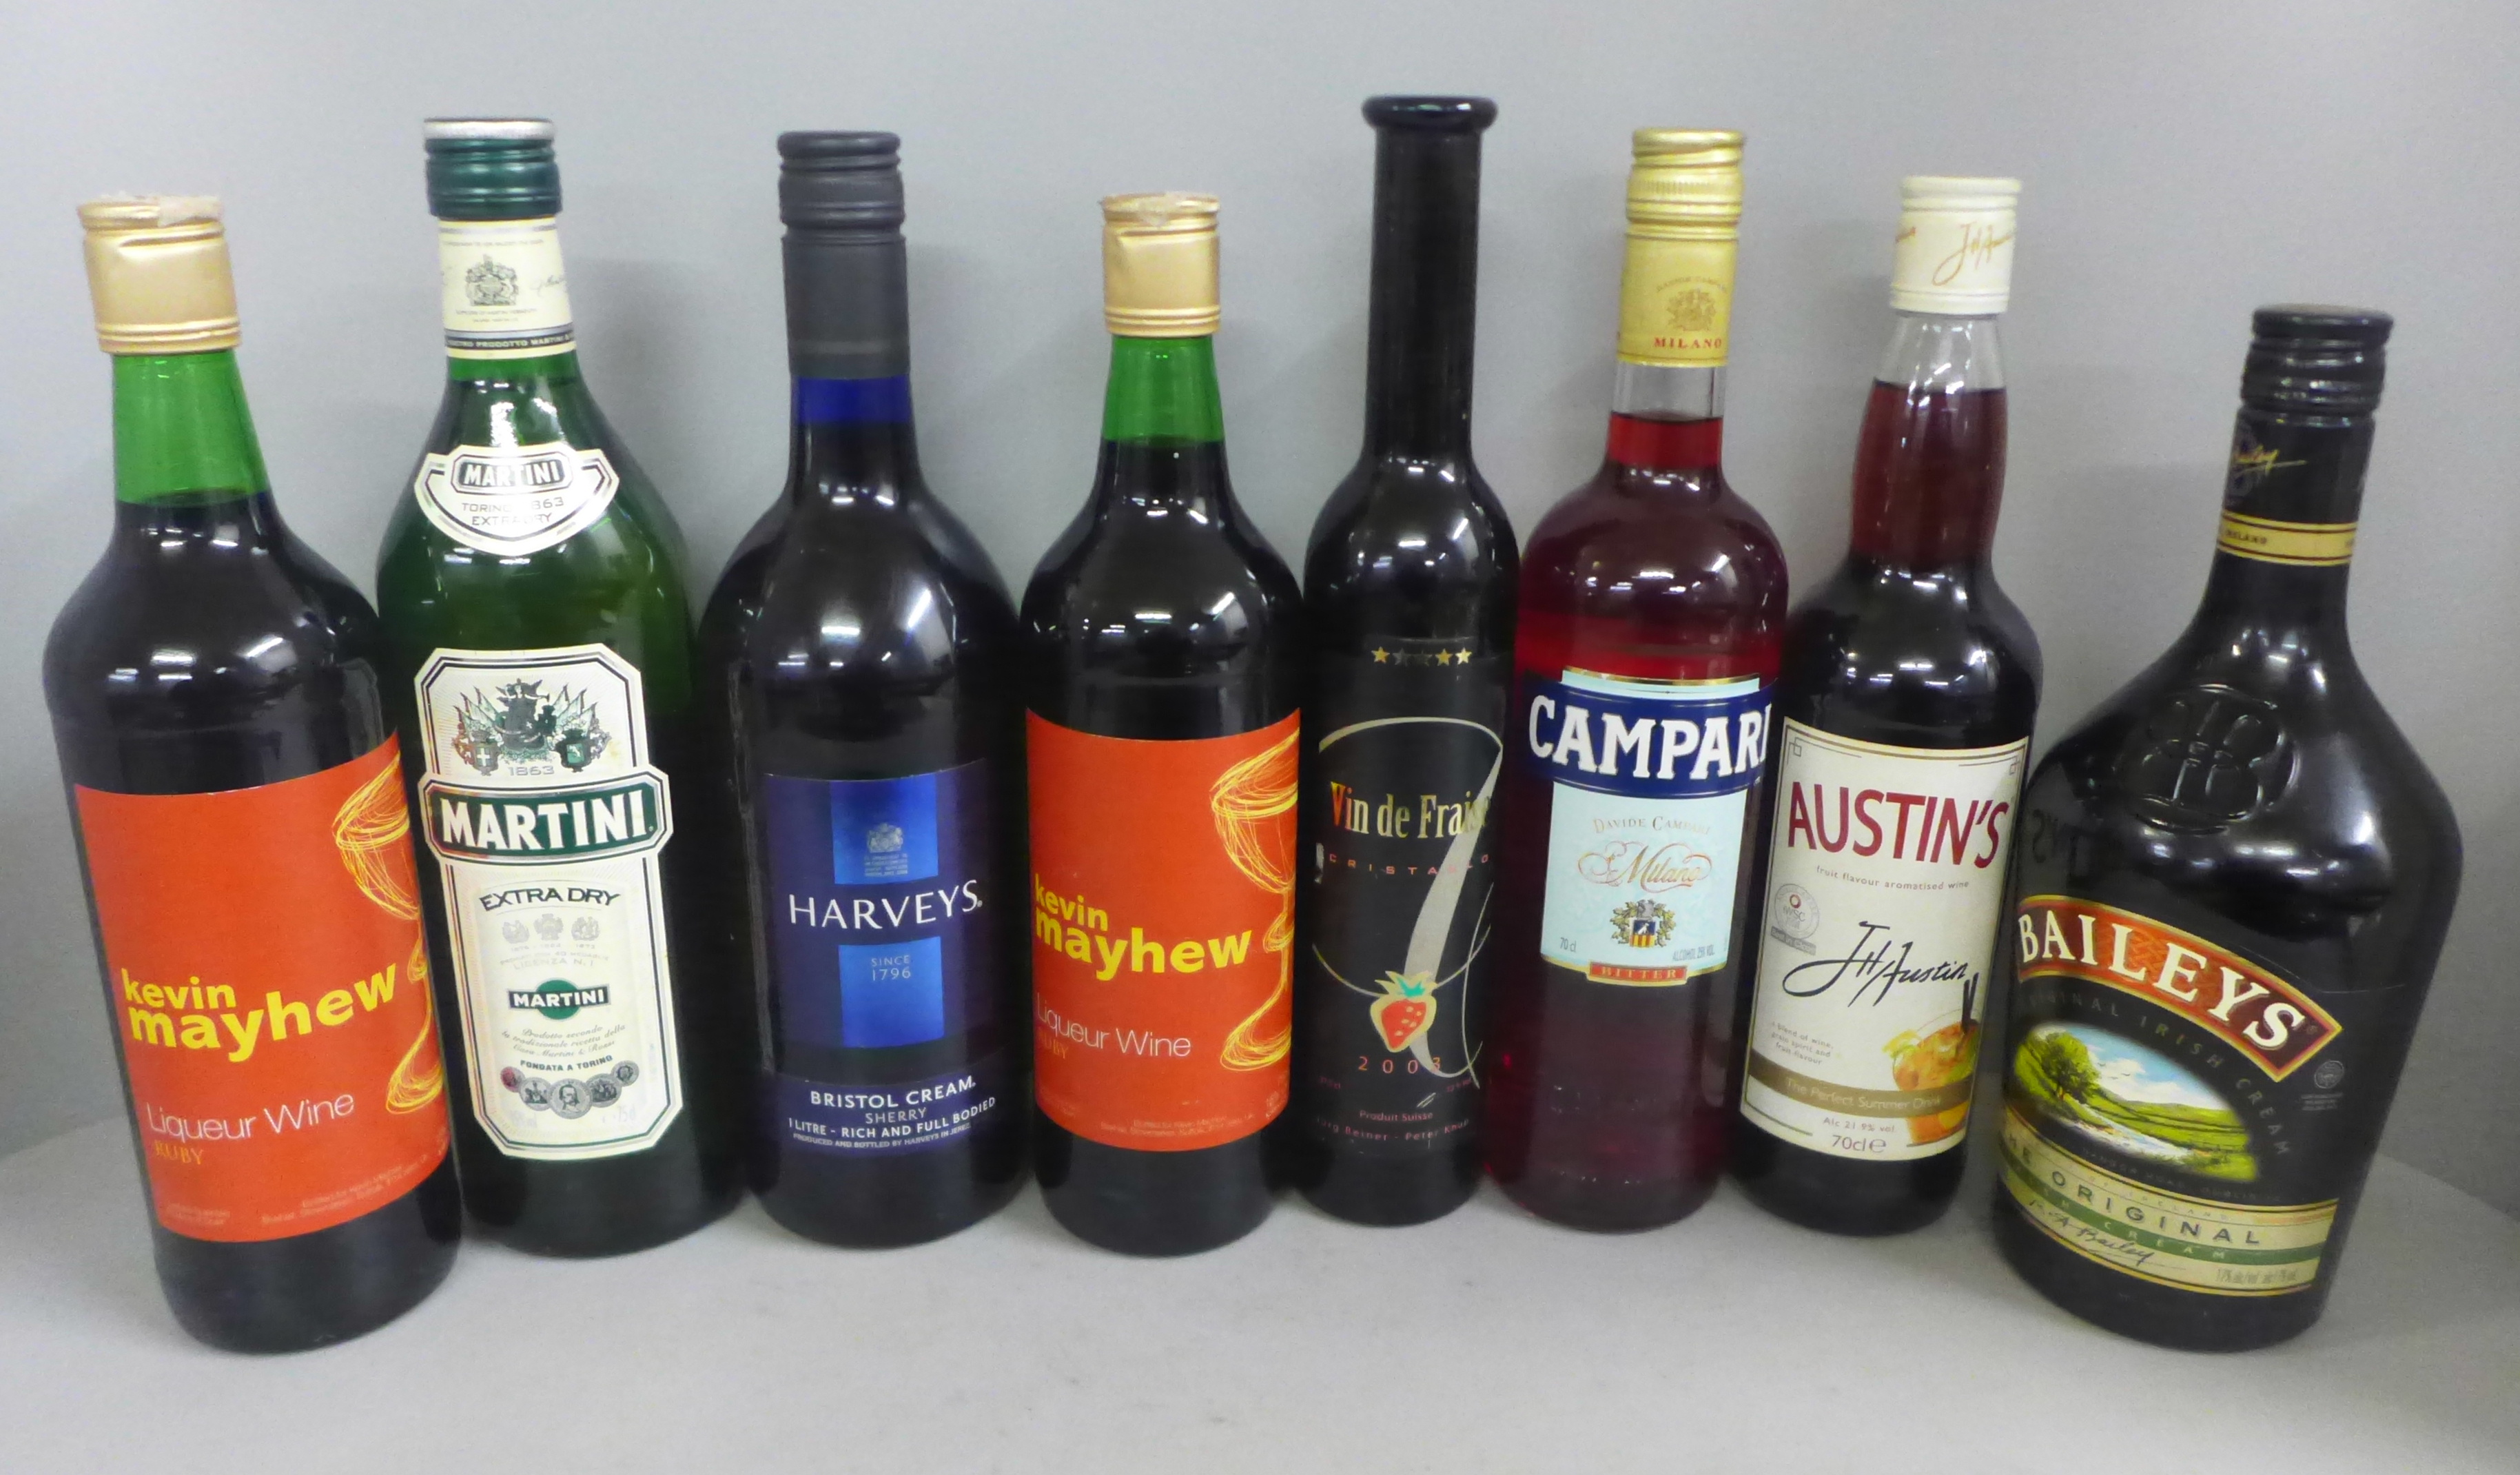 Eight bottles of assorted wines and spirits including Martini, Sherry, Campari, Baileys